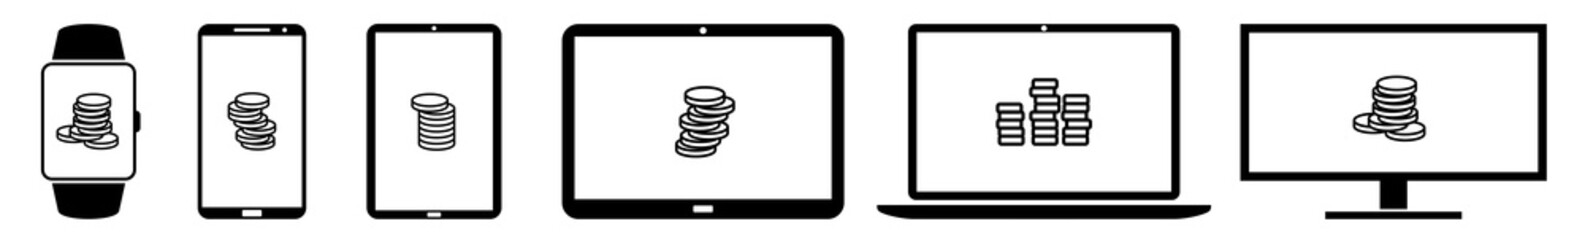 Display Coins, Money, Cash, Rich, Crypto, Currency, Banking Icon Devices Set | Web Screen Device Online | Laptop Vector Illustration | Mobile Phone | PC Computer Tablet Sign Isolated